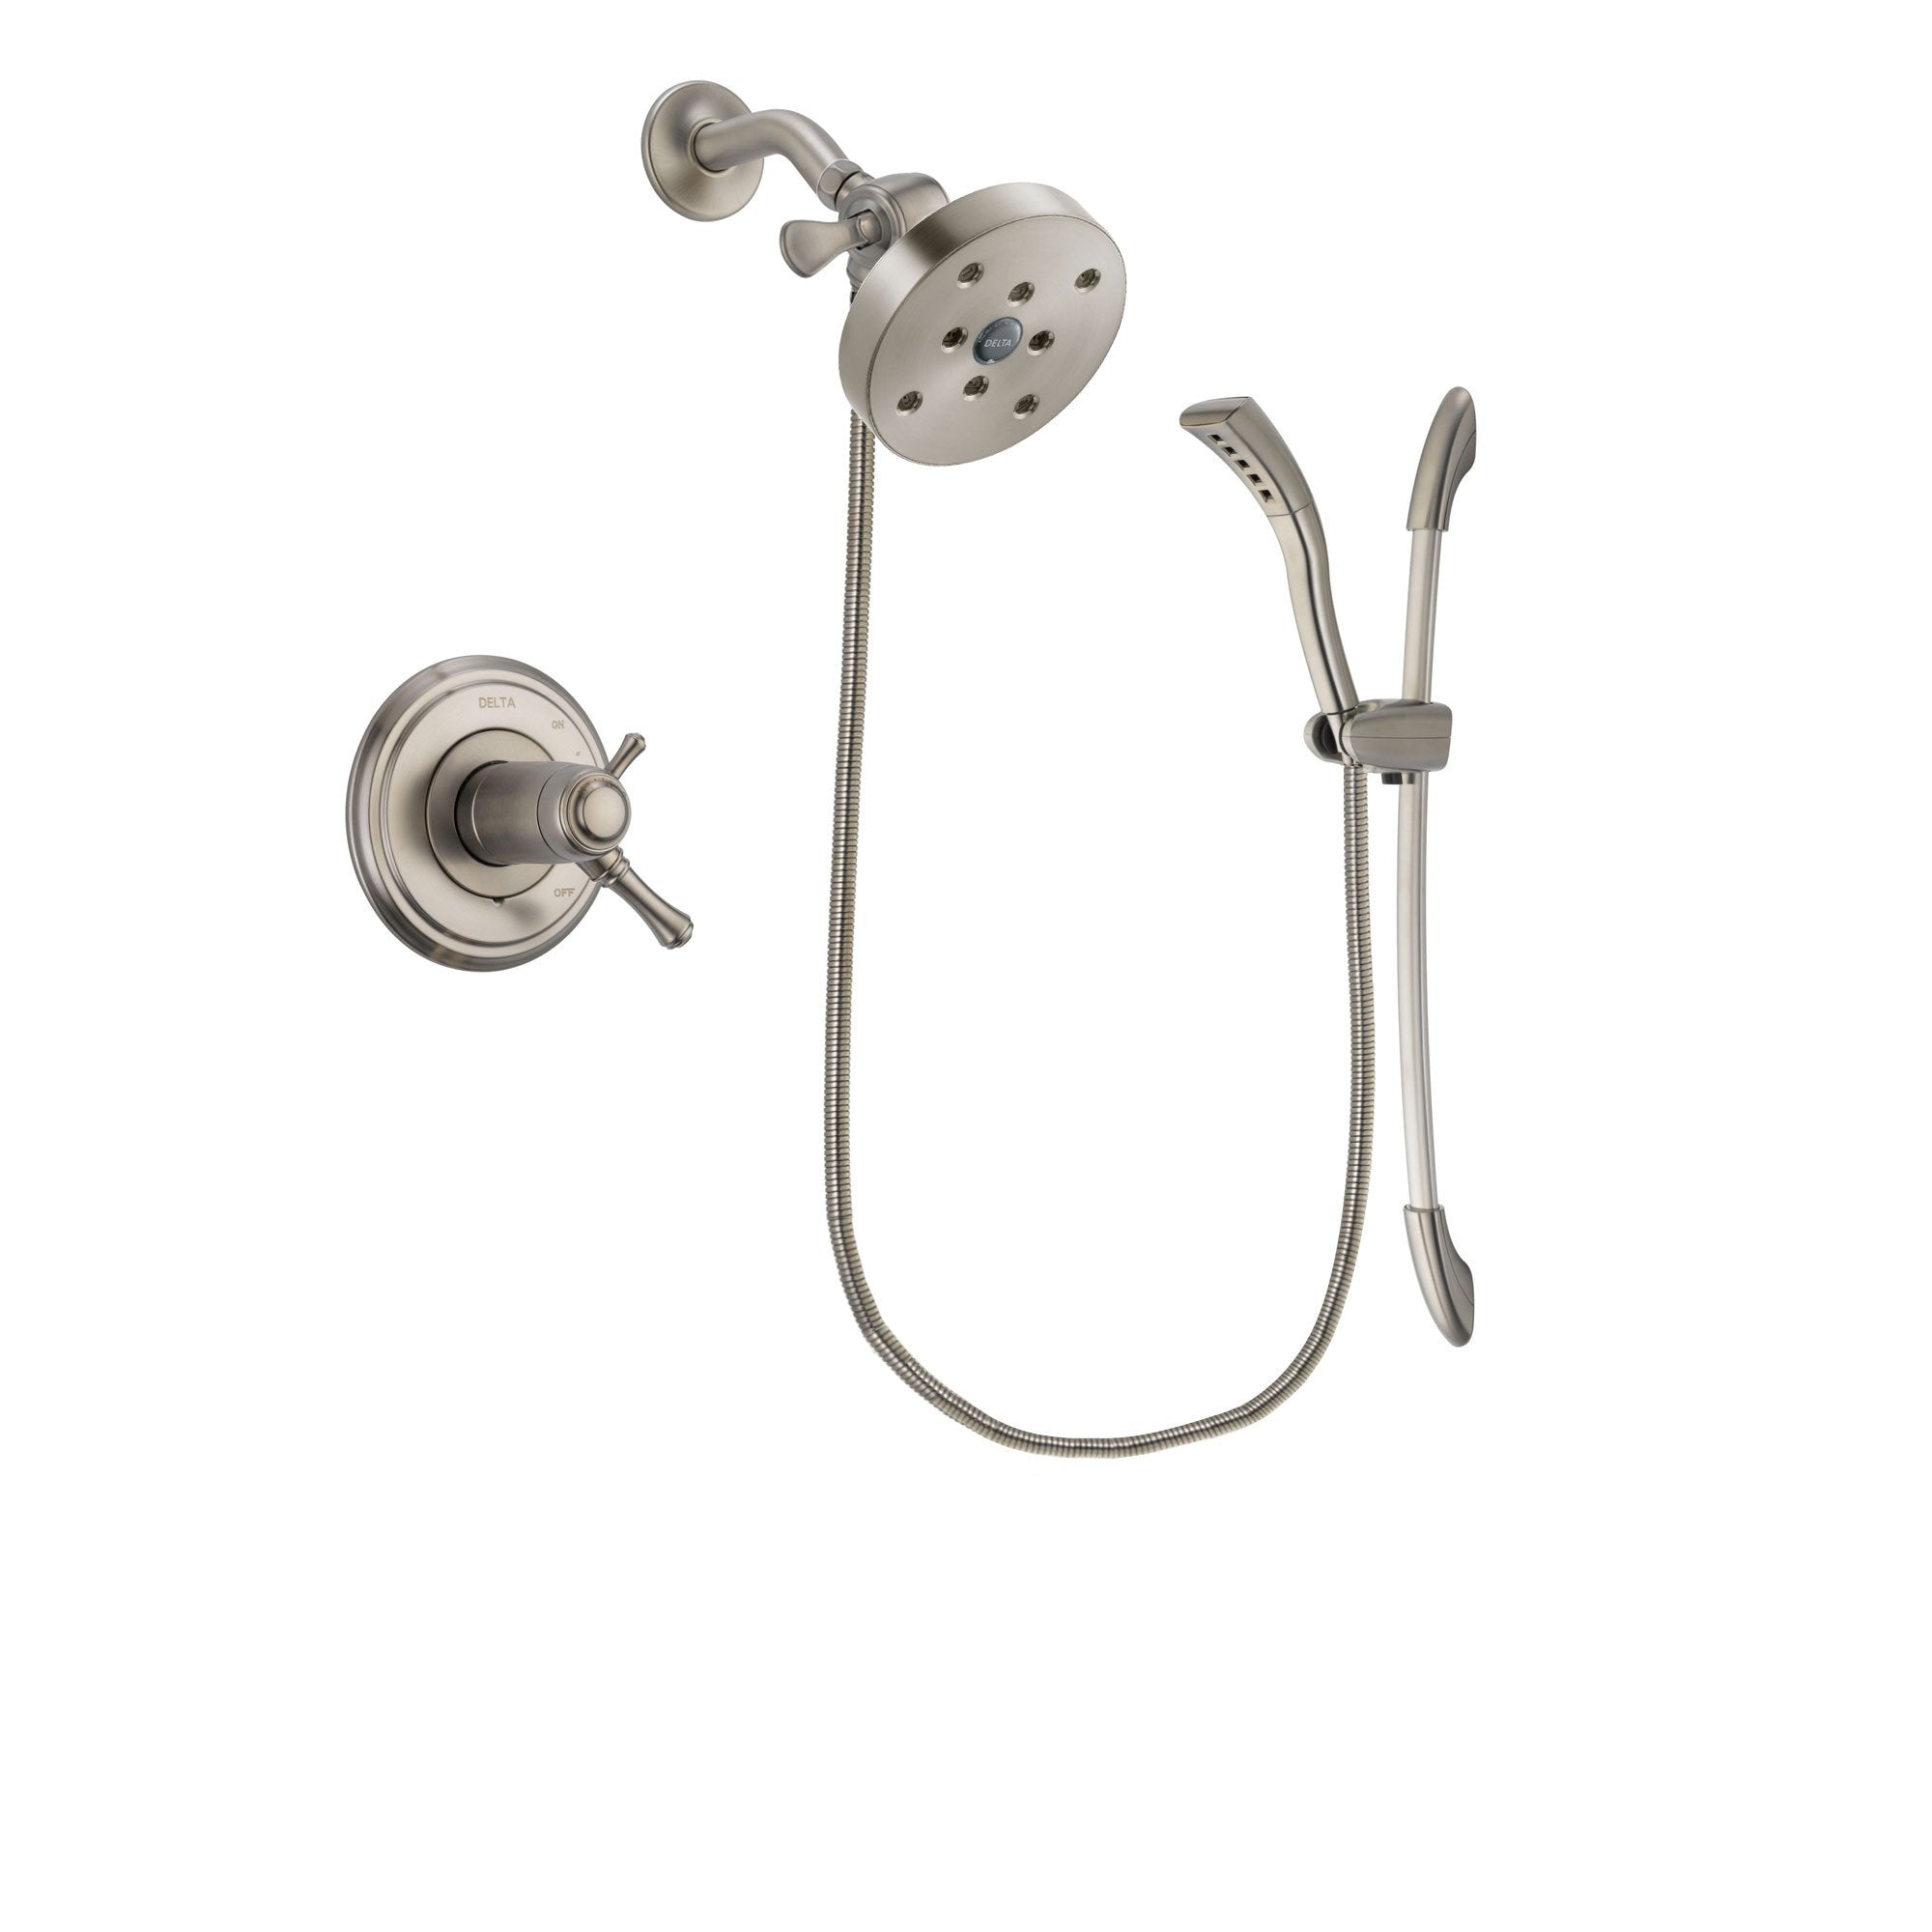 Delta Cassidy Stainless Steel Finish Thermostatic Shower Faucet System Package with 5-1/2 inch Shower Head and Handshower with Slide Bar Includes Rough-in Valve DSP1488V